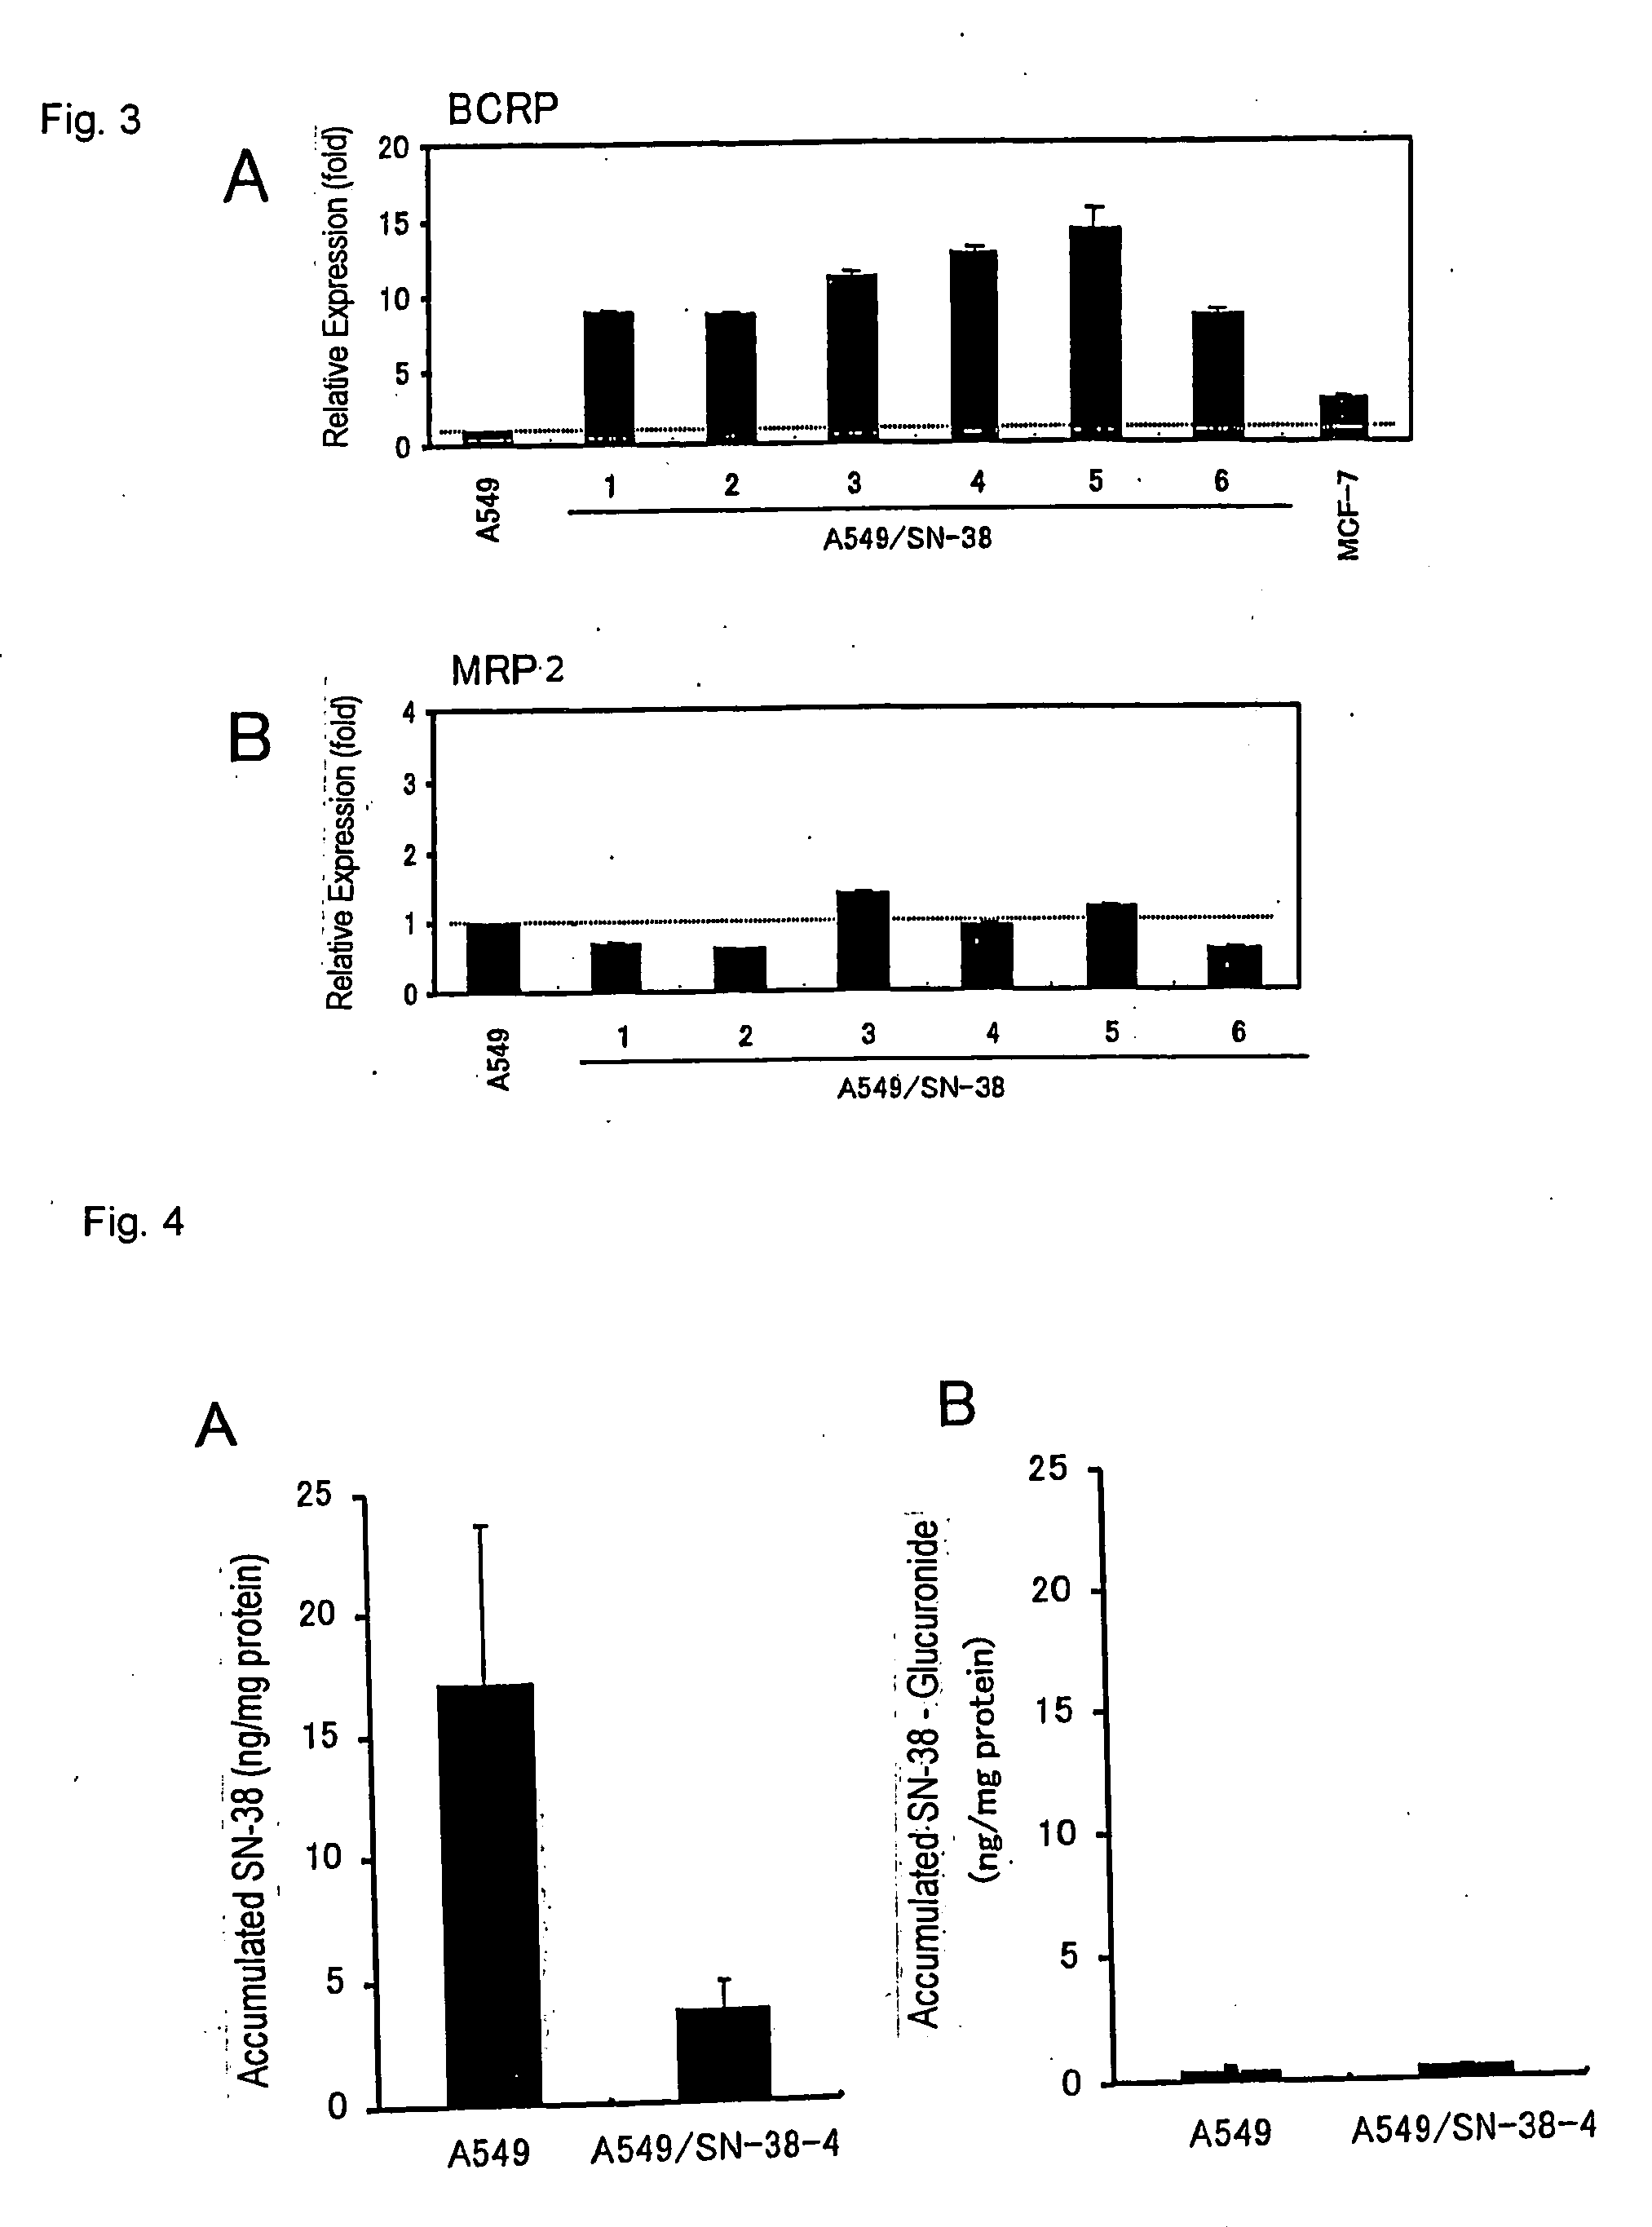 Breast cancer resistance protein (bcrp) inhibitor